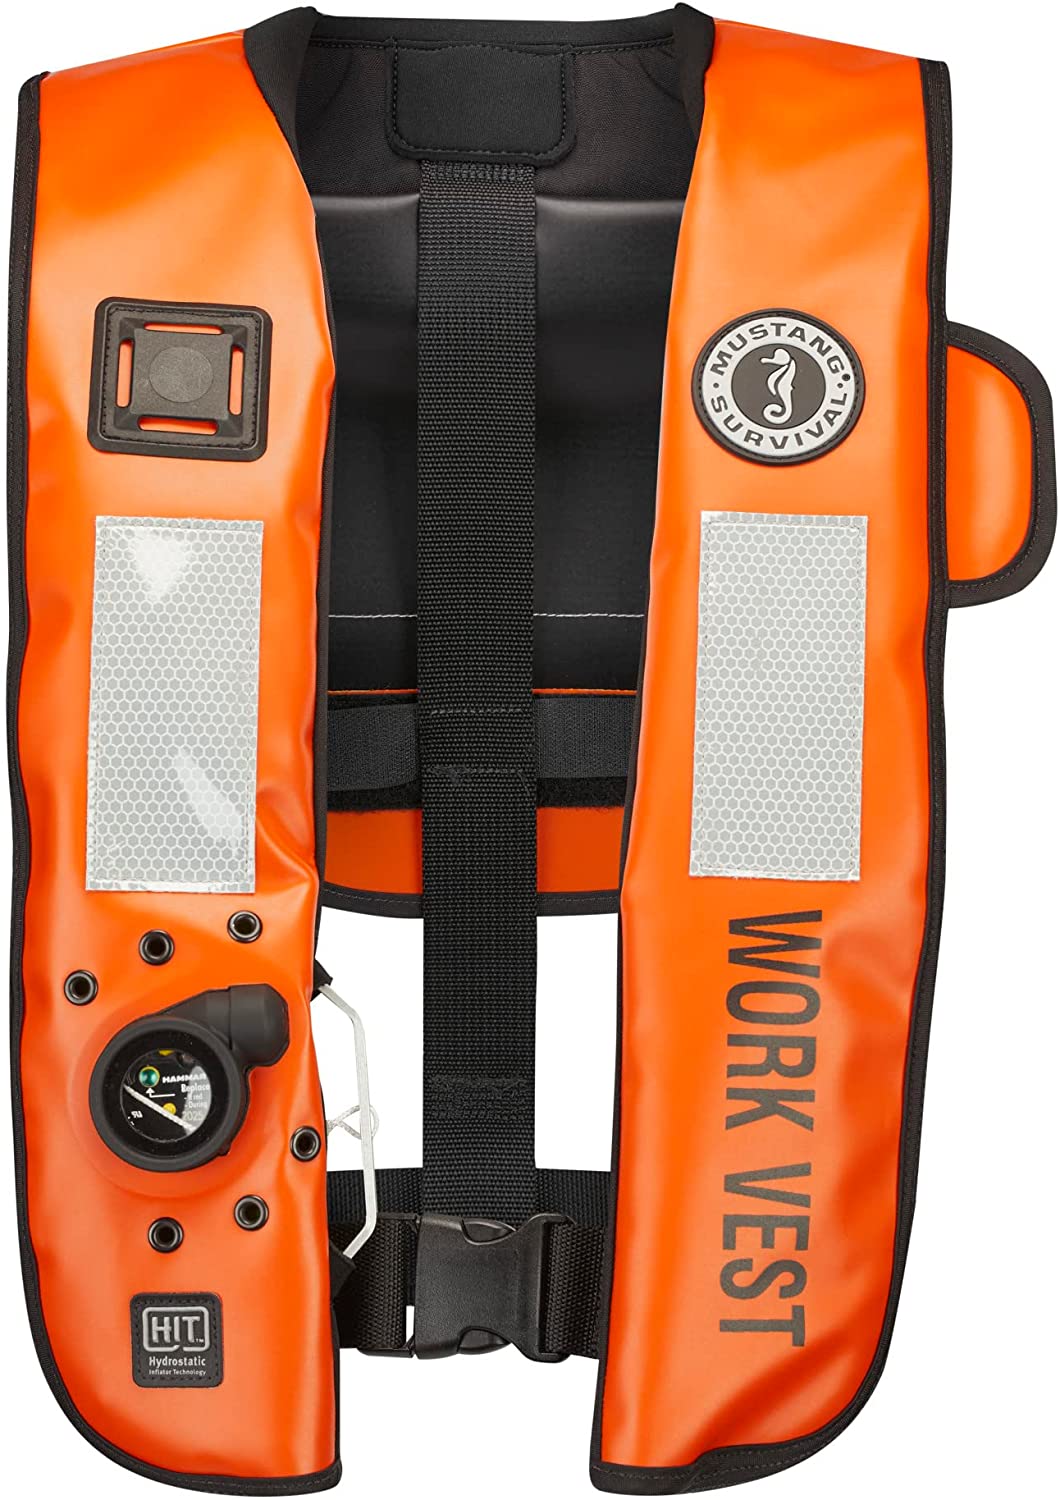 Mustang Survival – HIT Inflatable Work Vest for Adults (Orange & Black – One Size Fits All), Auto Hydrostatic, Enhanced Mobility and Reduced Heat Stress, 35 lb. of Buoyancy